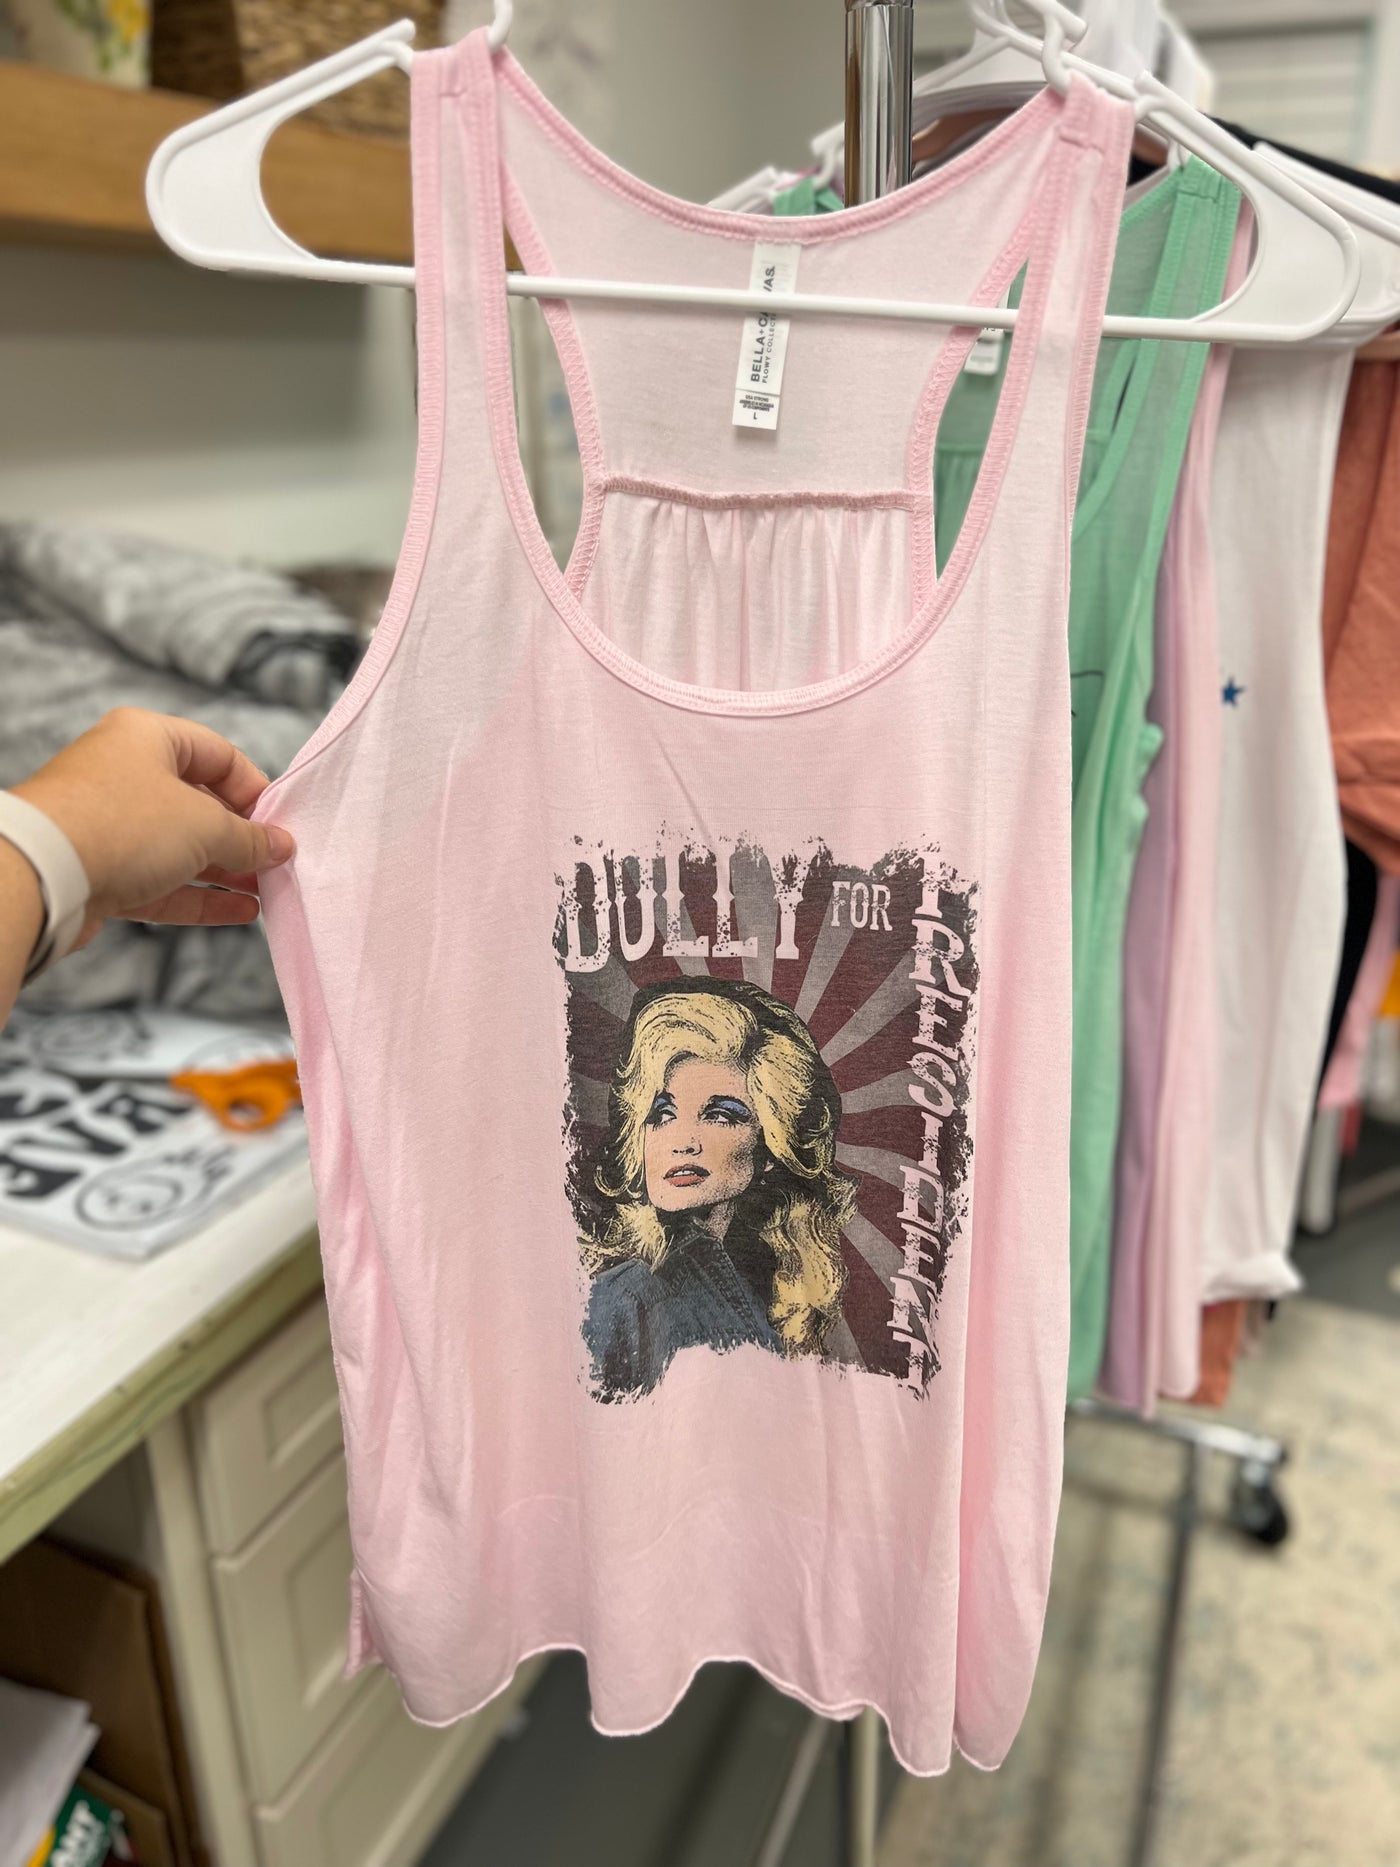 CLEARANCE: Size Large "Dolly for President" Bella Canvas Tank